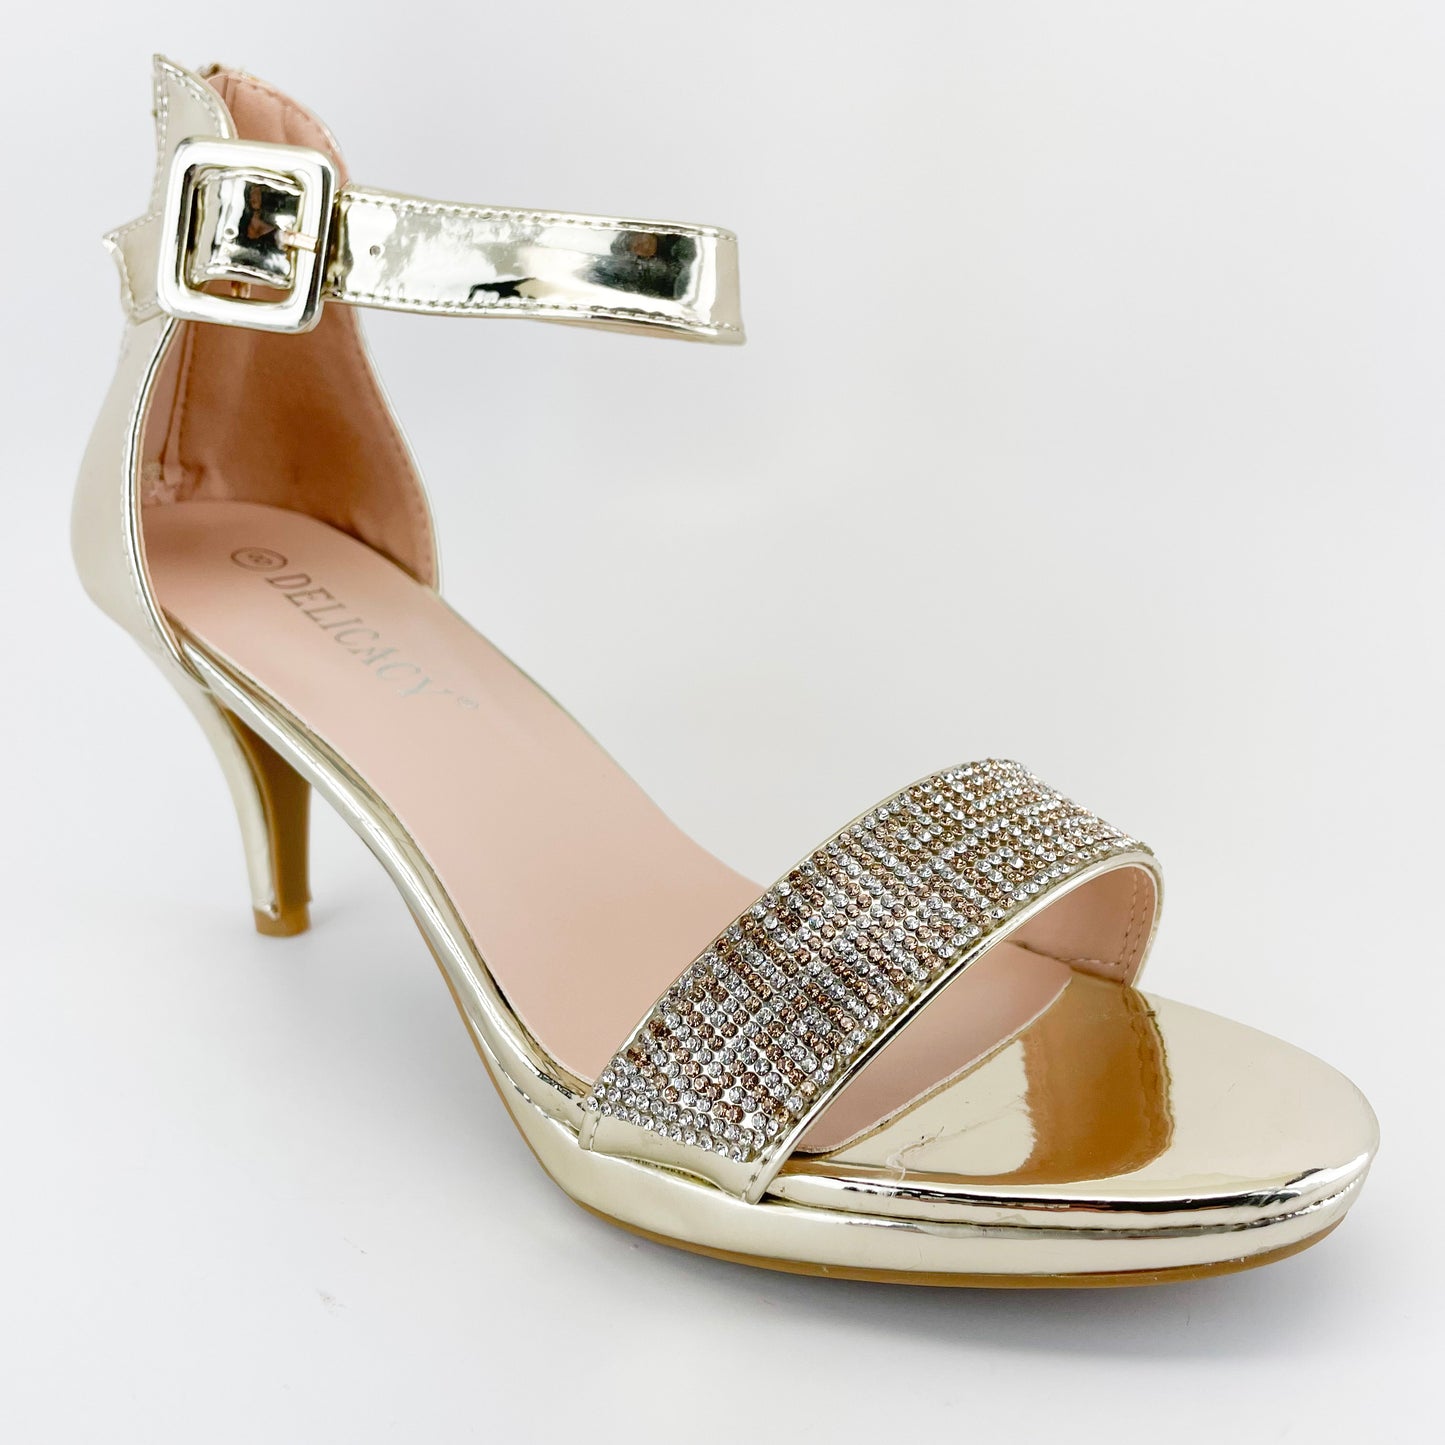 delicacy excited-105 gold pat heels with rhinestones